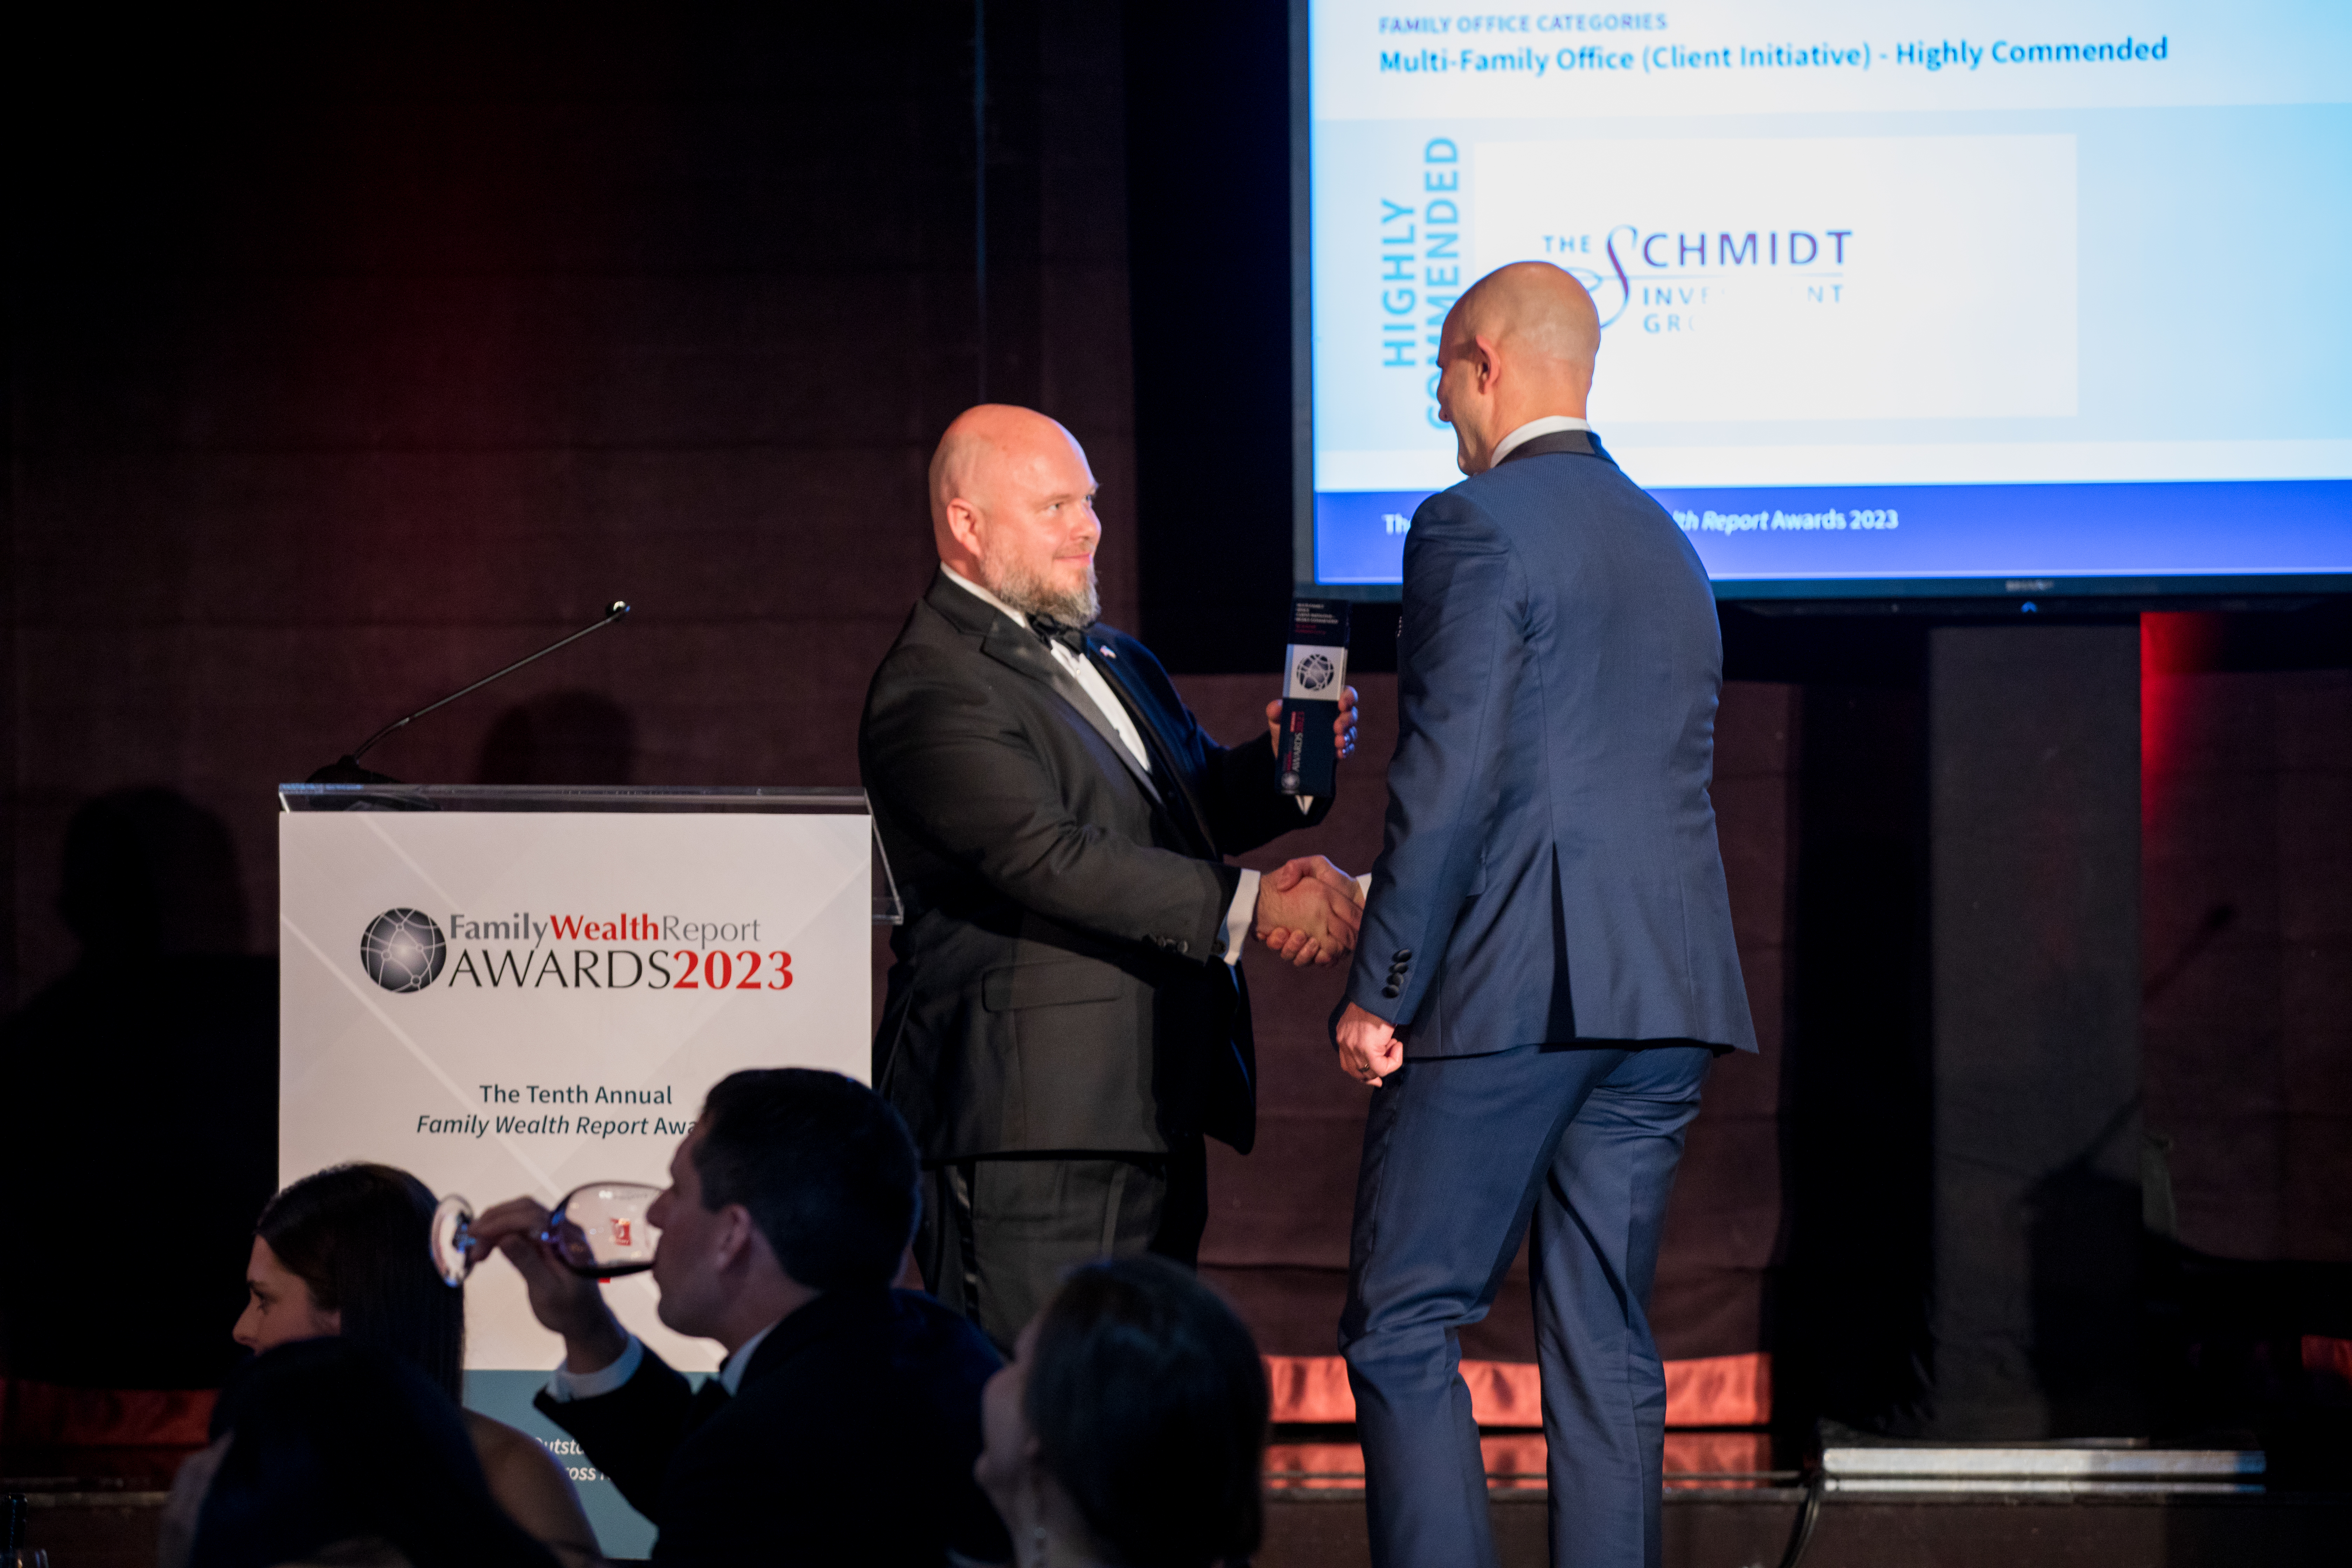 Marcin Schmidt accepting FWR award, shaking hands with presenter on stage